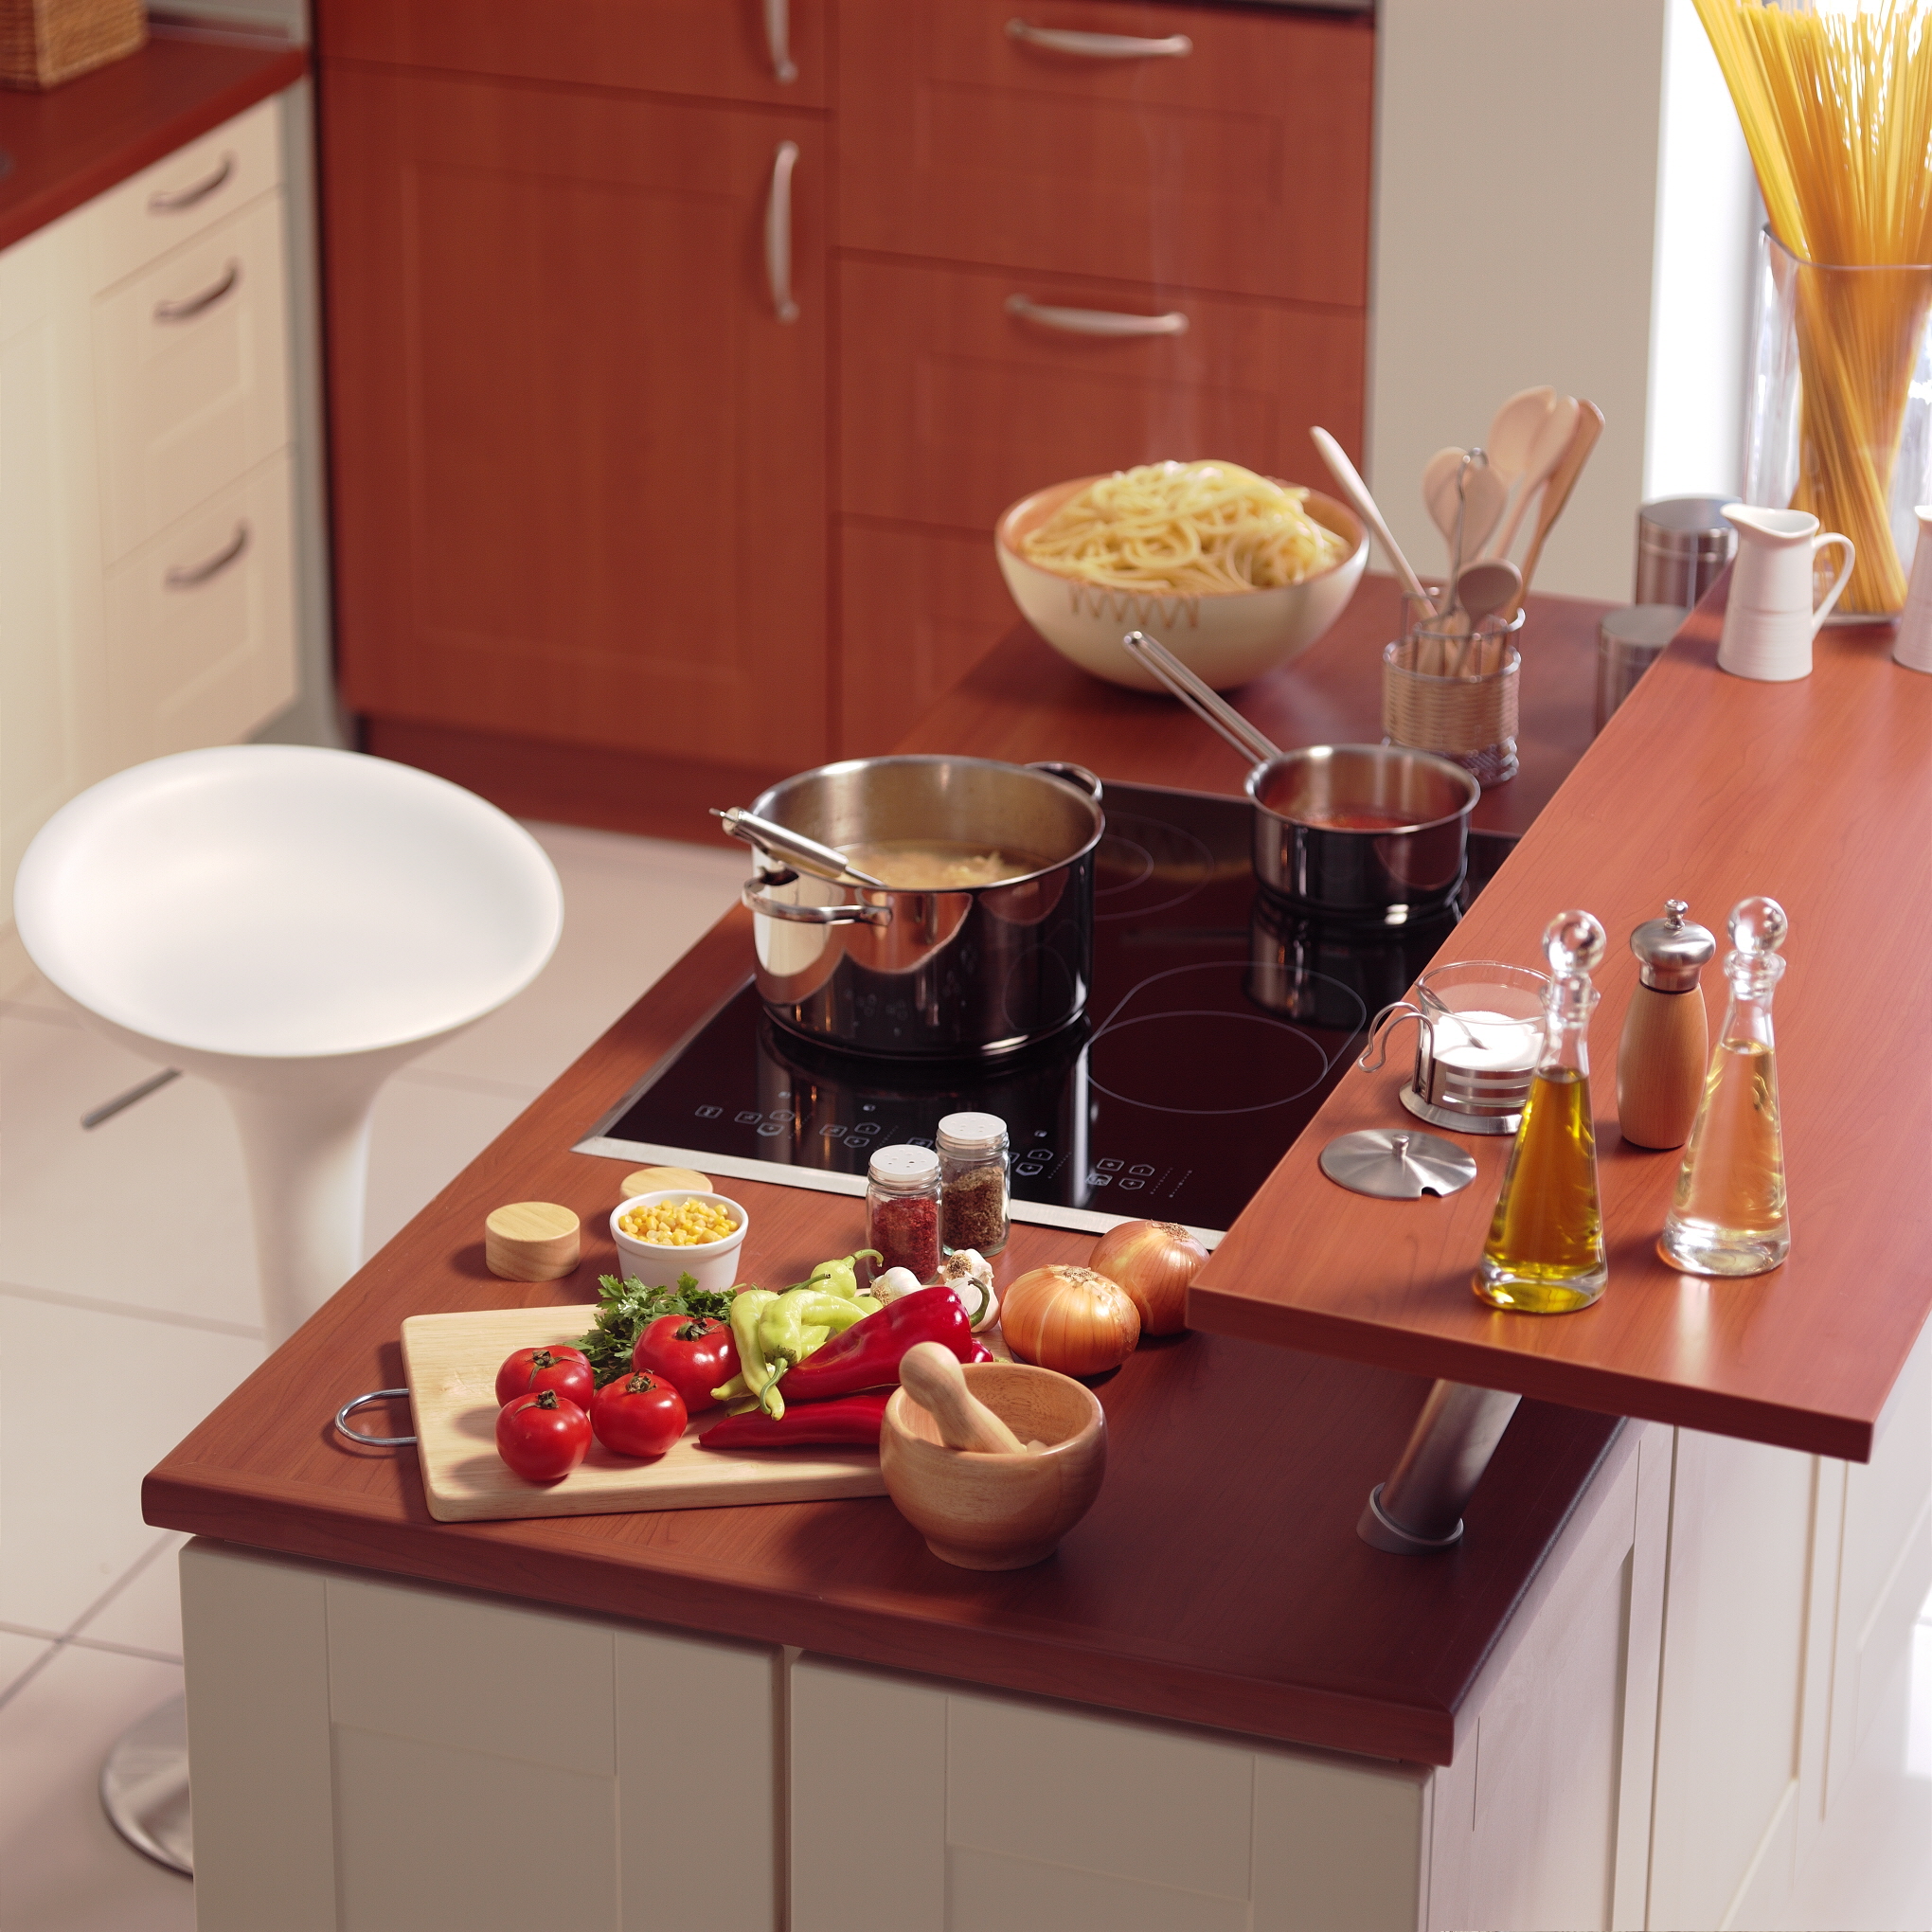 LX Hausys surfaces offer vibrant colors for a lively kitchen full of personality.